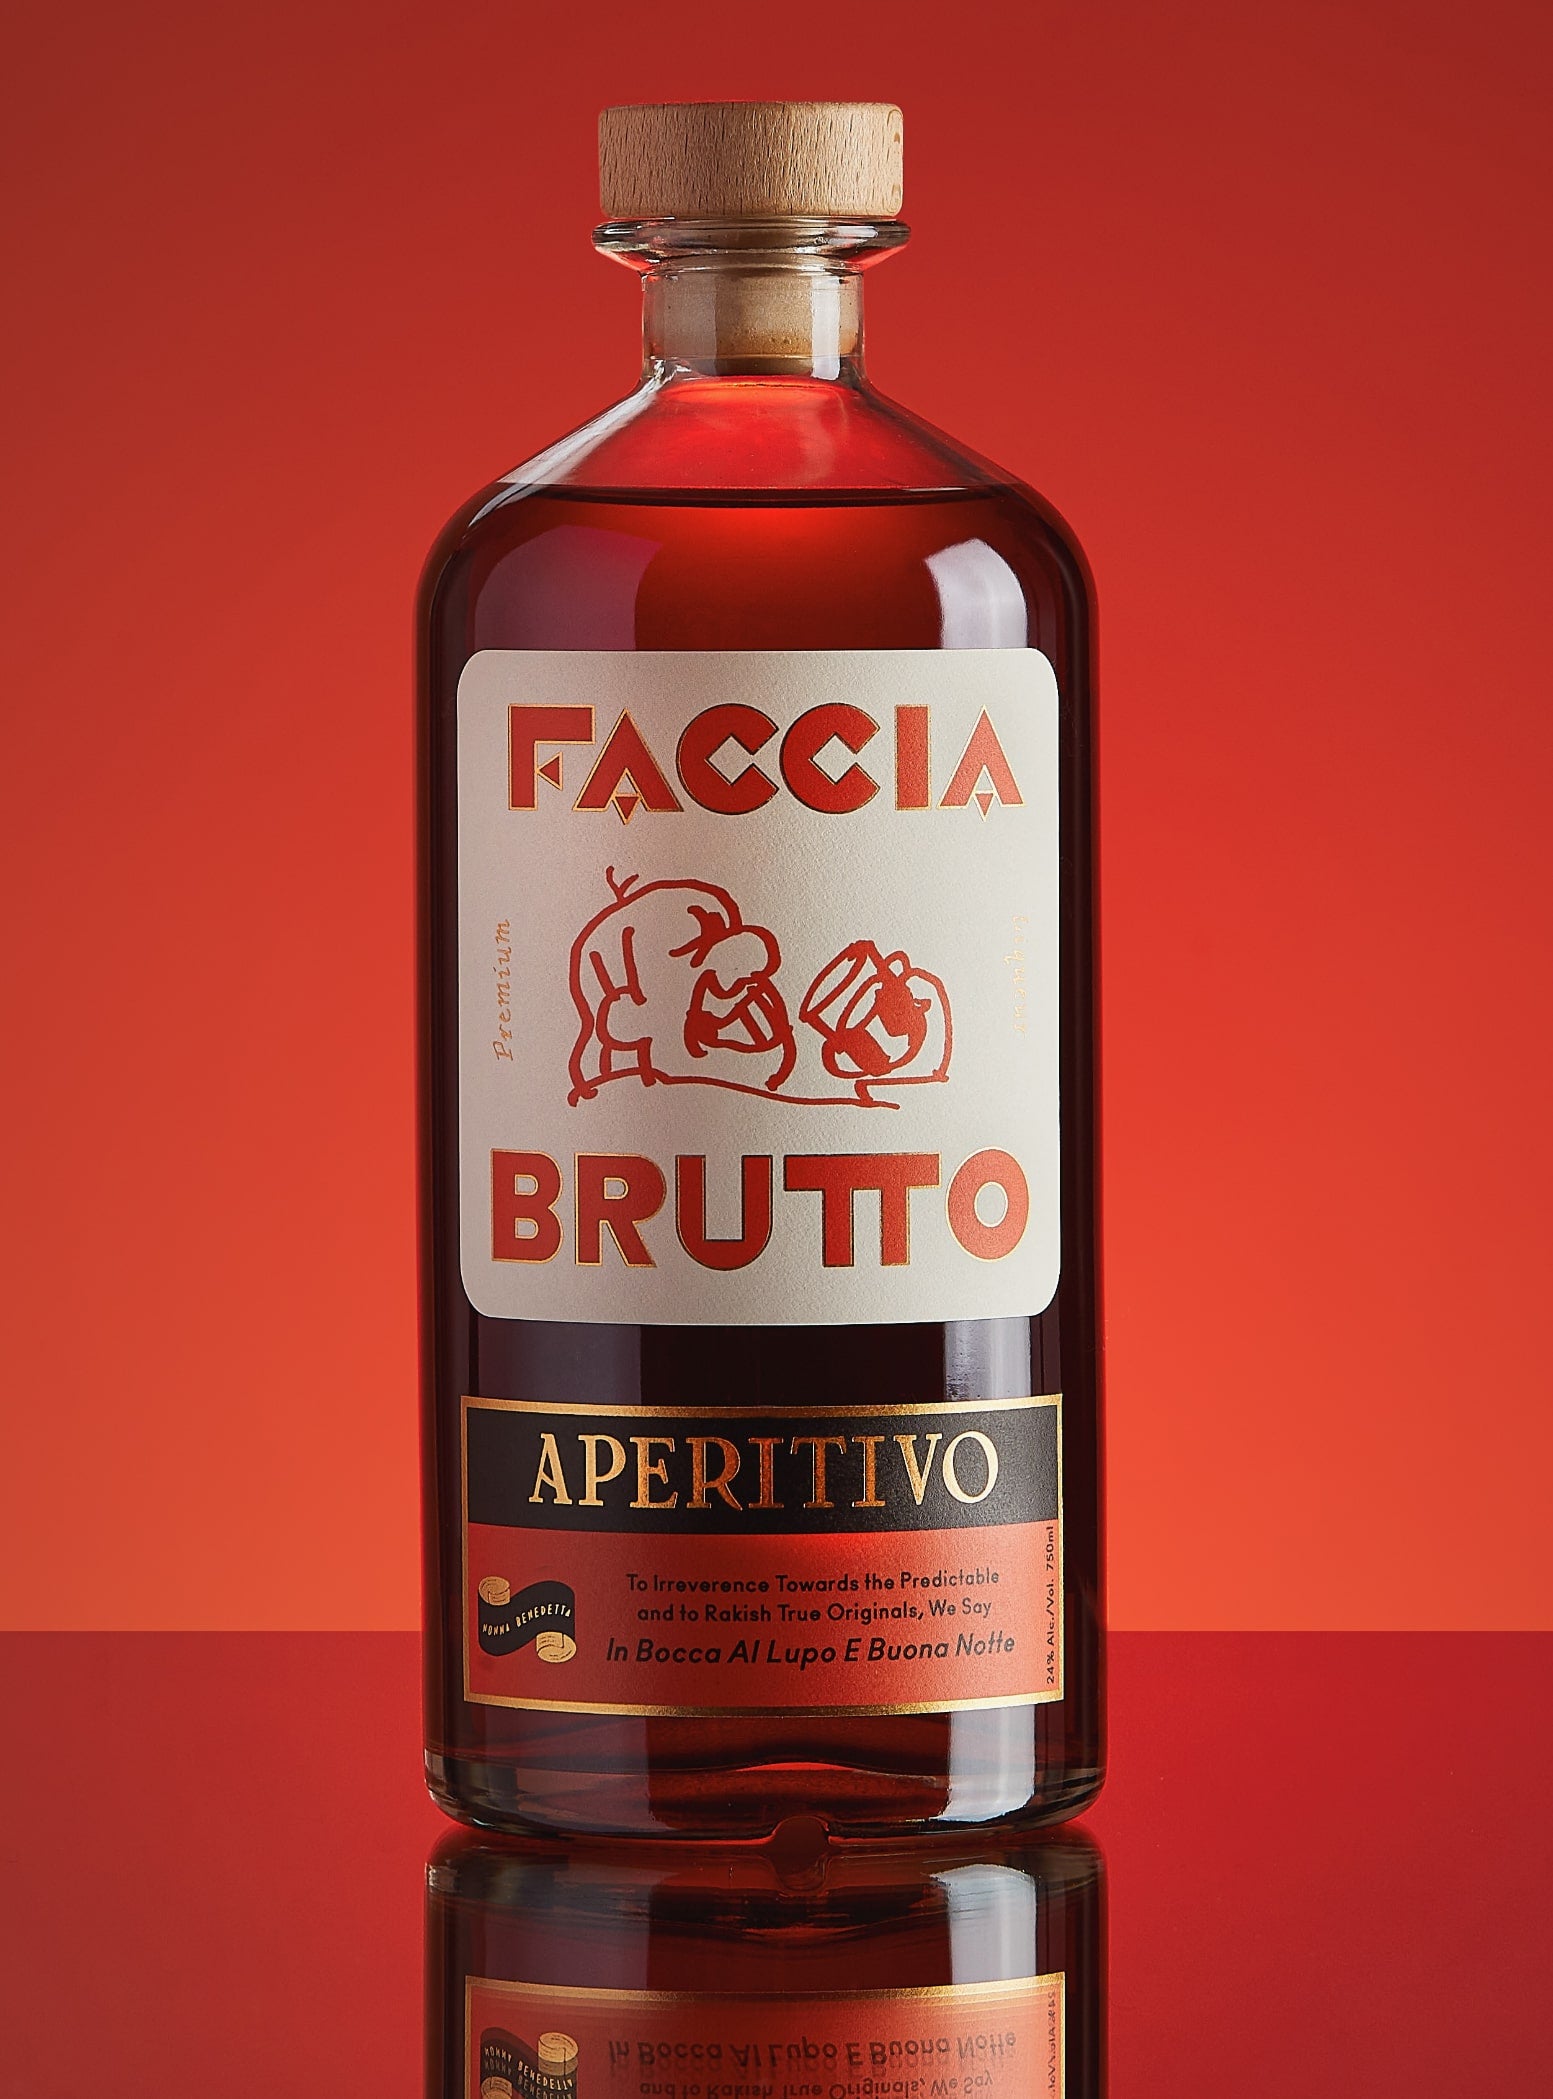 Cocktail on the rocks with orange peel and bottle of Faccia Brutto Aperitivo